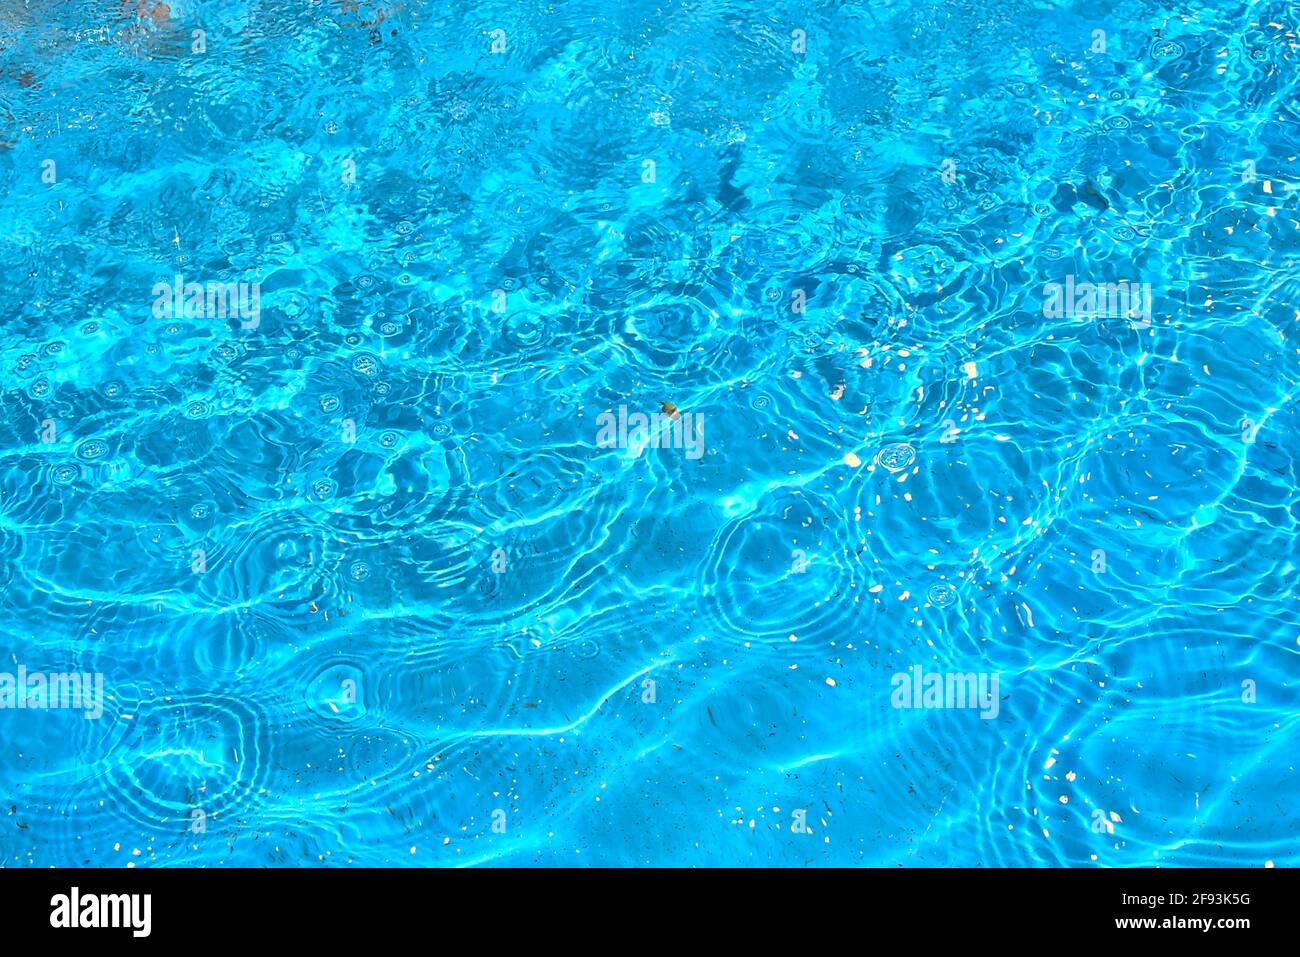 Blue Water  Outside in The Bright Sun With Few Ripples Stock Photo